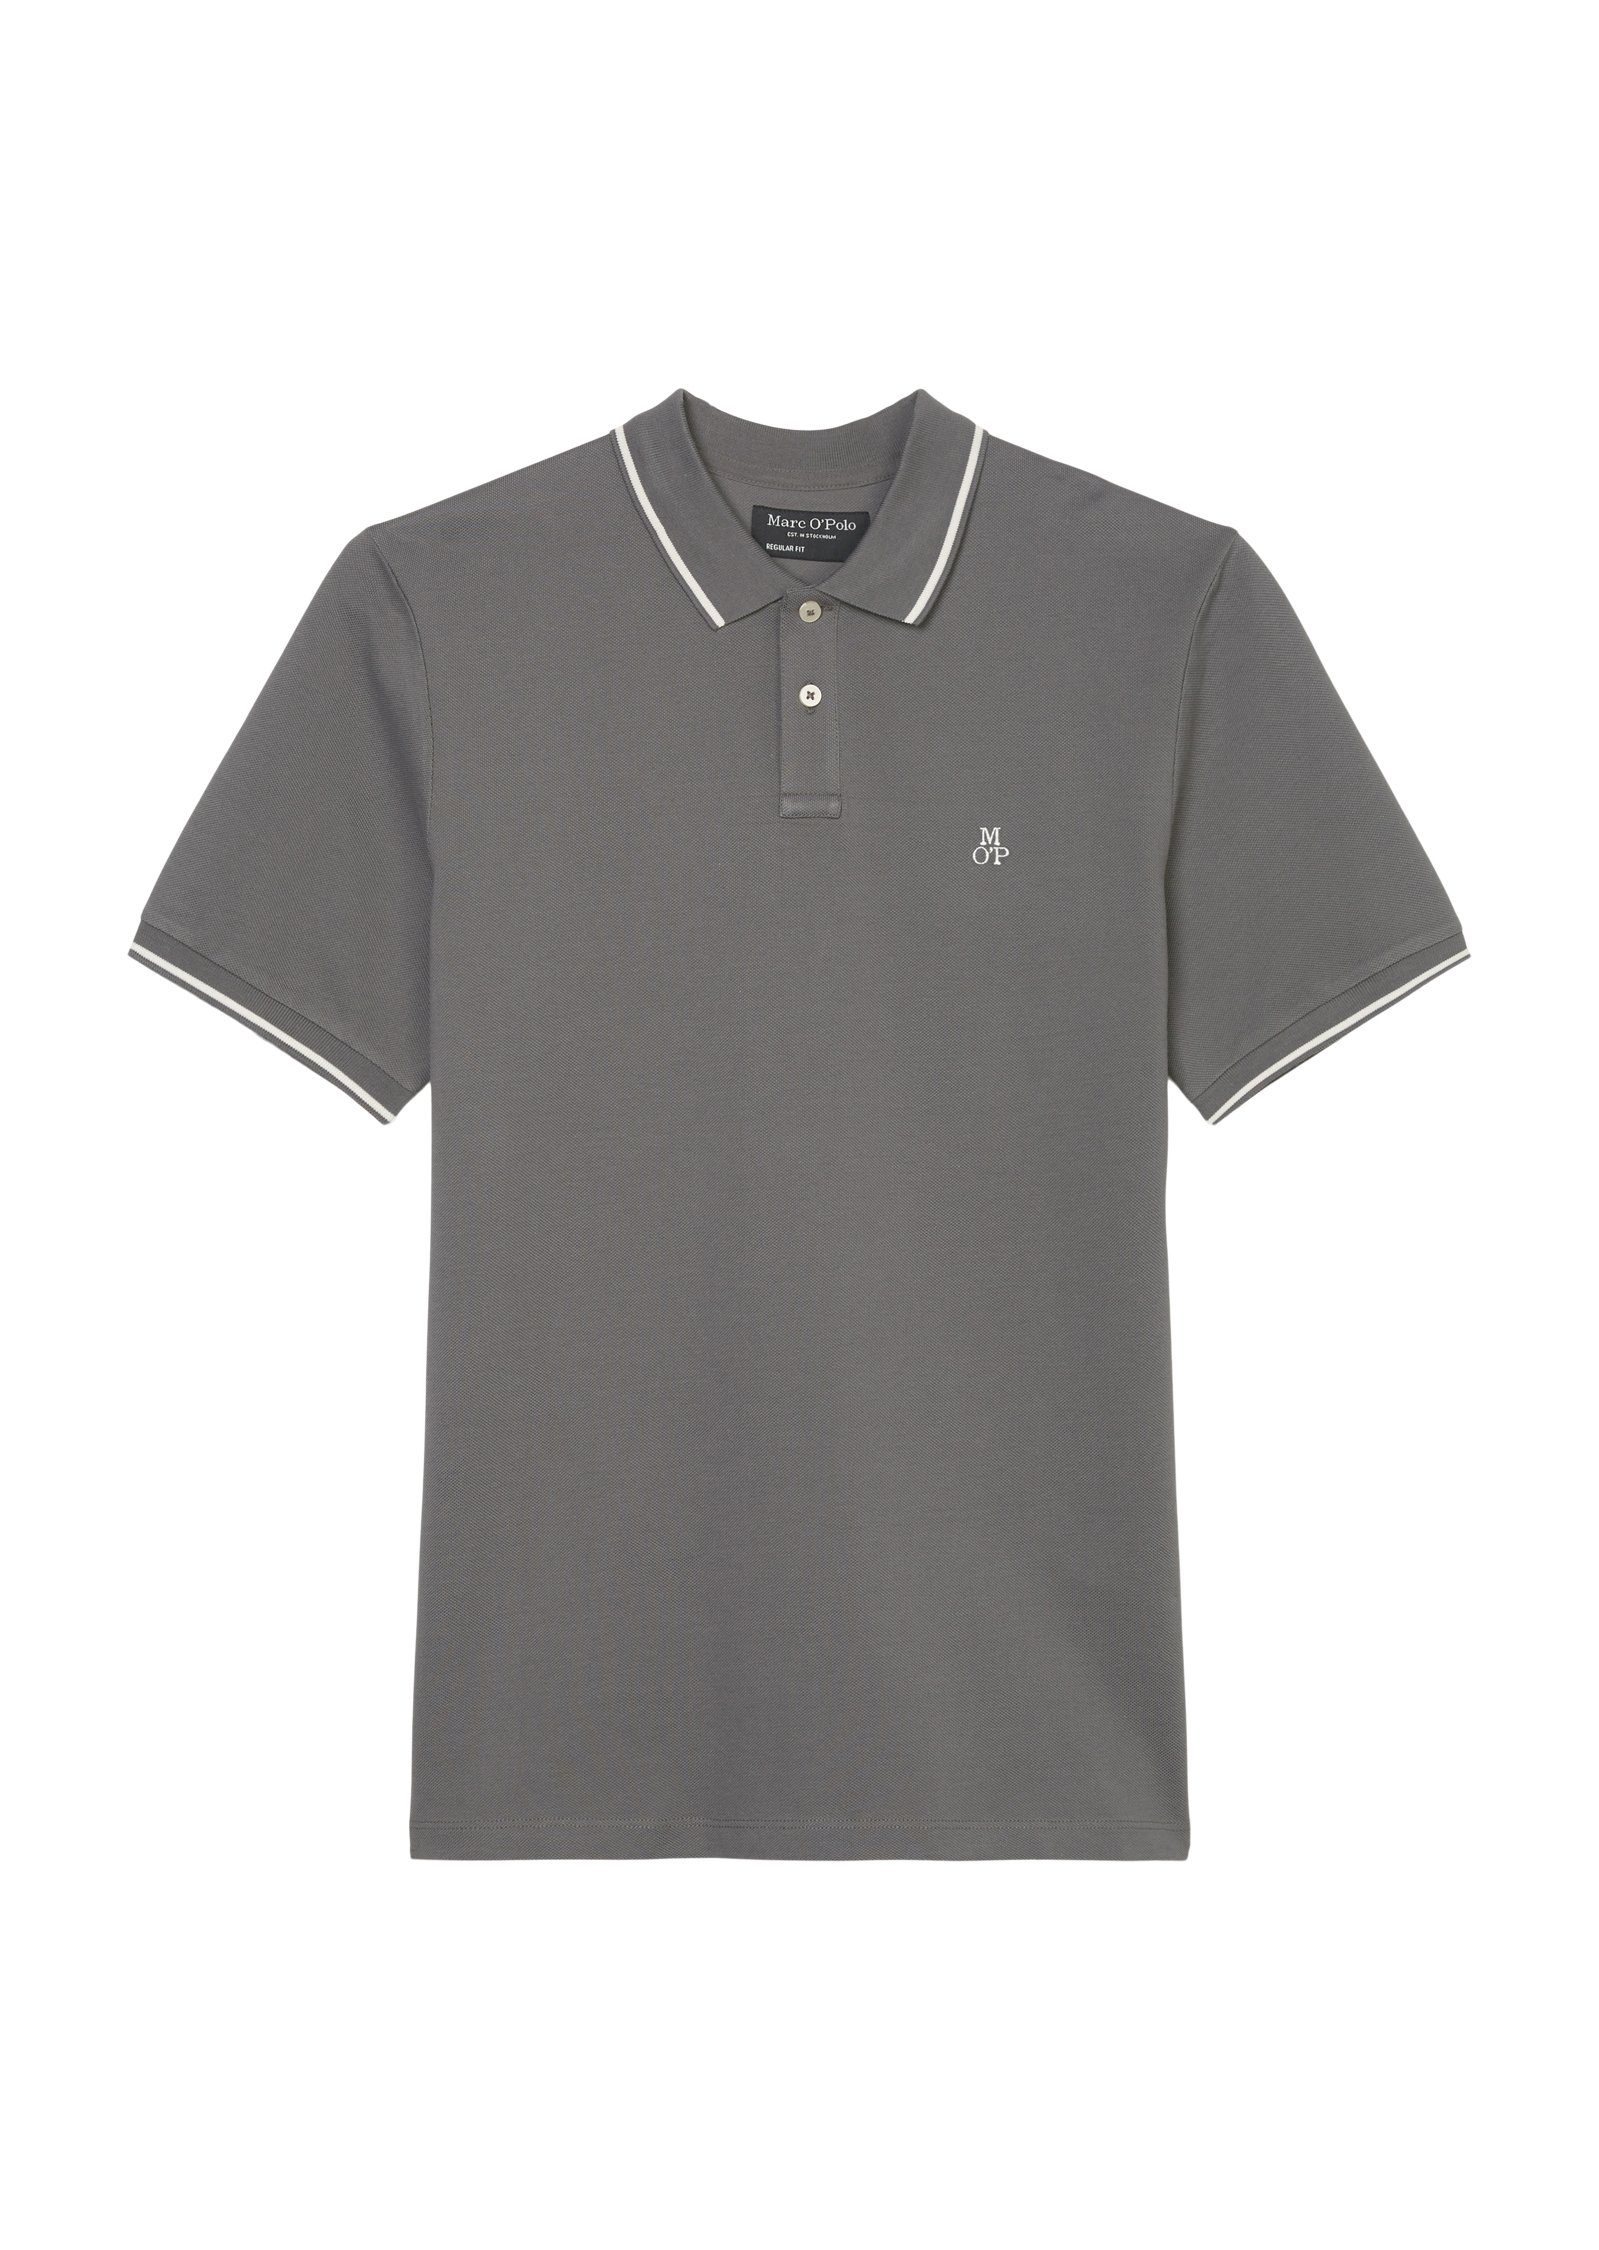 Marc O'Polo Poloshirt Polo shirt, chest sky Logostickerei at sleeve, moonless side, short mit embroidery slits on